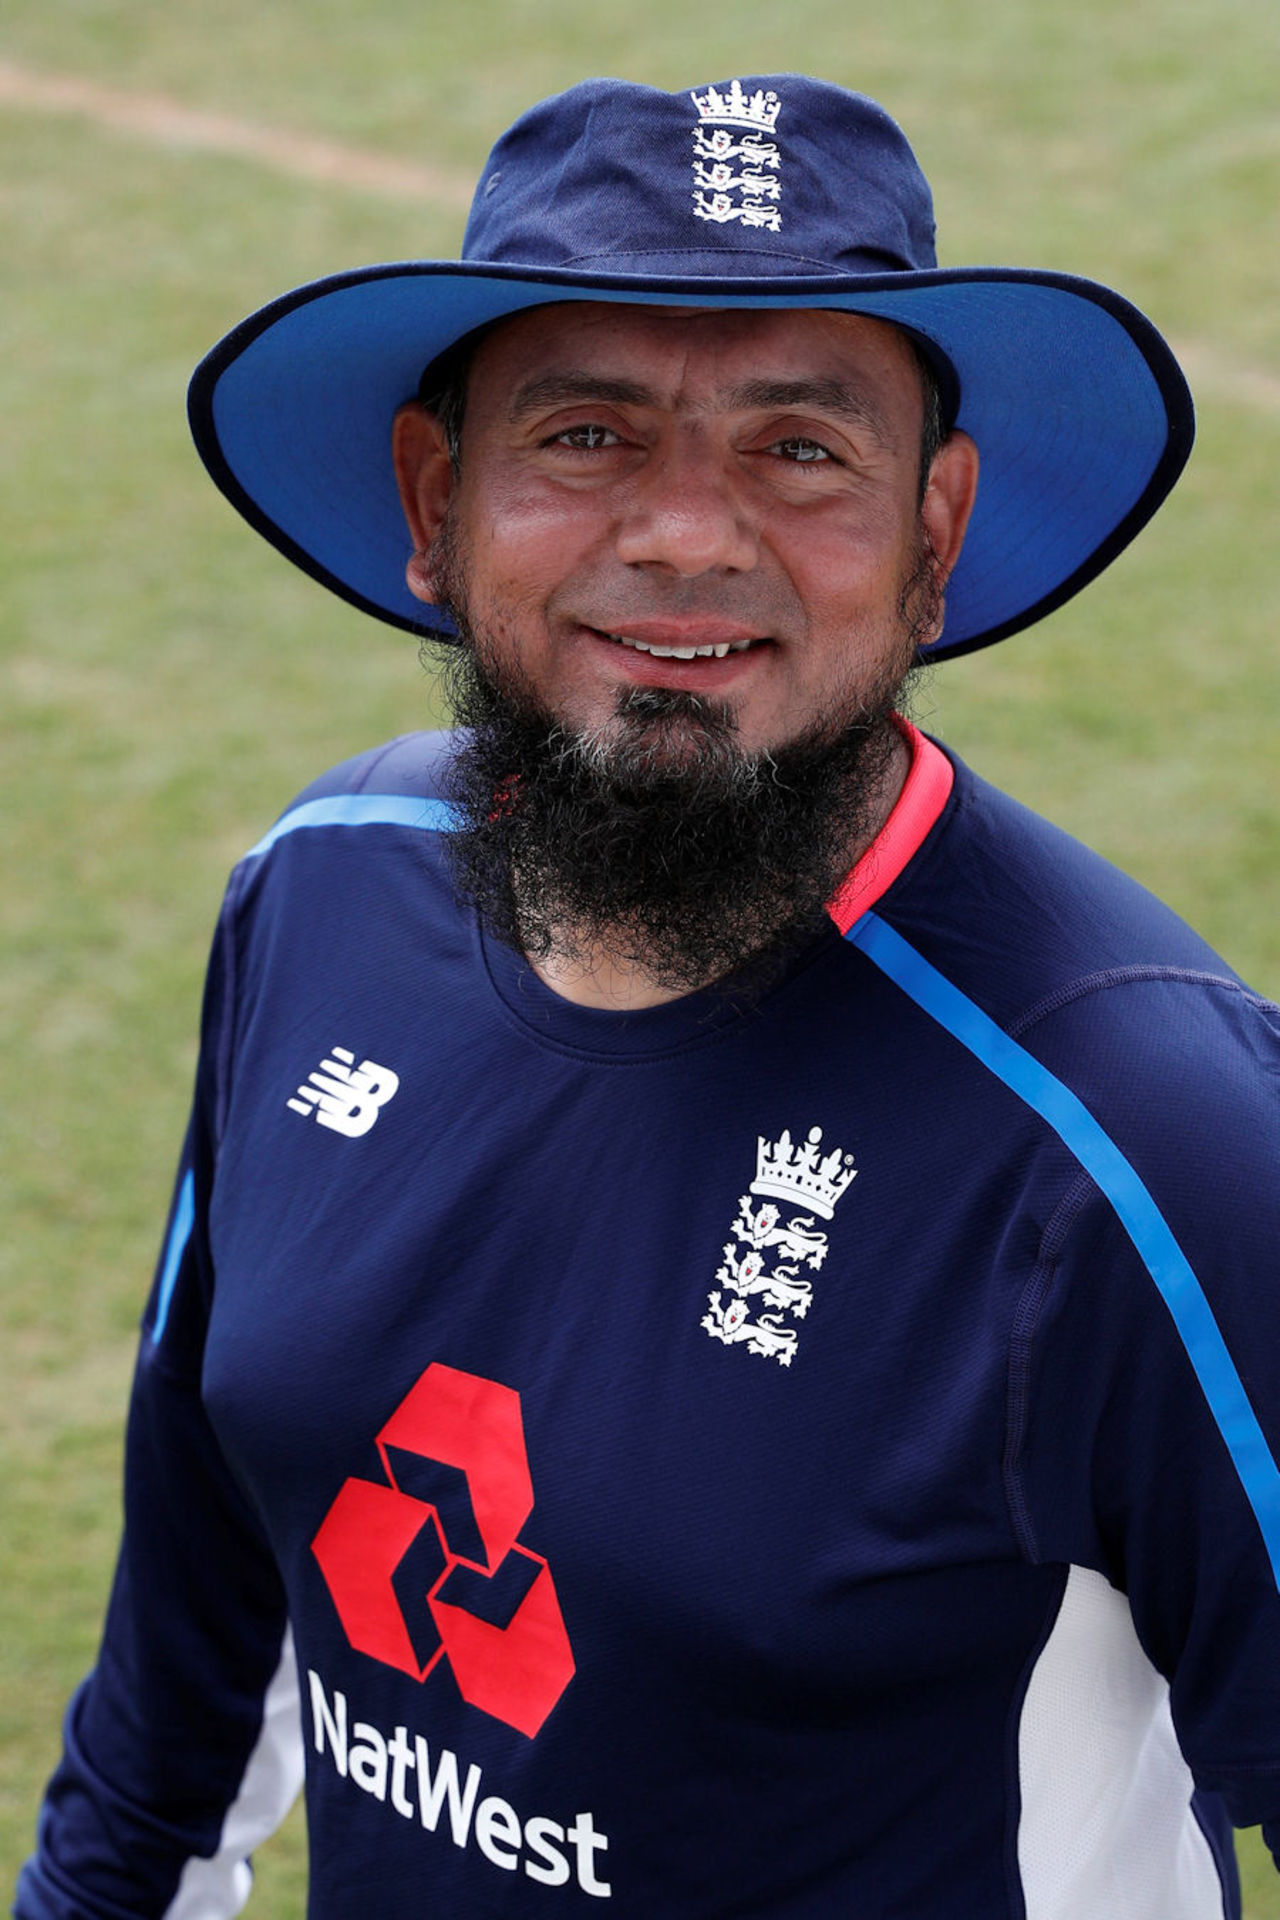 Saqlain Mushtaq was on hand as England's spin consultant, England Lions v South Africa A, unofficial Test, Canterbury, 2nd day, July 22, 2017